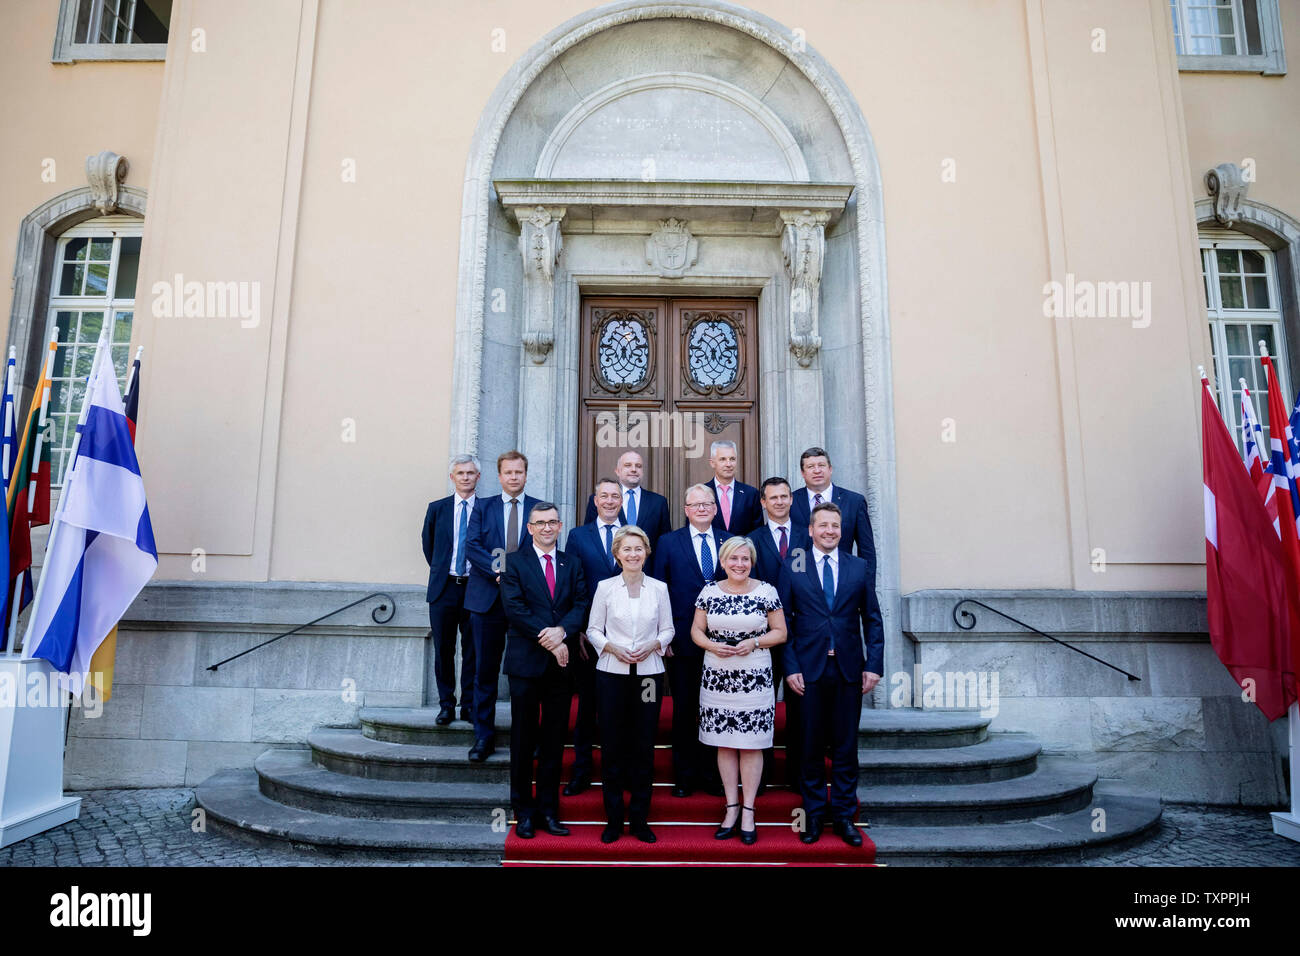 25 June 2019, Berlin: Thomas Ahrenkiel (last row, l-r), Parliamentary State Secretary in the Ministry of Defence of Denmark, Antti Kaikkonen, Minister of Defence of Finland, Jüri Luik, Minister of Defence of Estonia, Artis Pabriks, Minister of Defence of Latvia, Raimundas Karoblis, Minister of Defence of Lithuania, Frank Bakke-Jensen (middle row, l-r), Minister of Defence of Norway, Peter Hultqvist, Minister of Defence of Sweden, Mark Lancaster, Andrzej Przy··bski (front row, l-r), Minister of State of the United Kingdom Armed Forces, Ambassador of the Republic of Poland to the Federal Republi Stock Photo